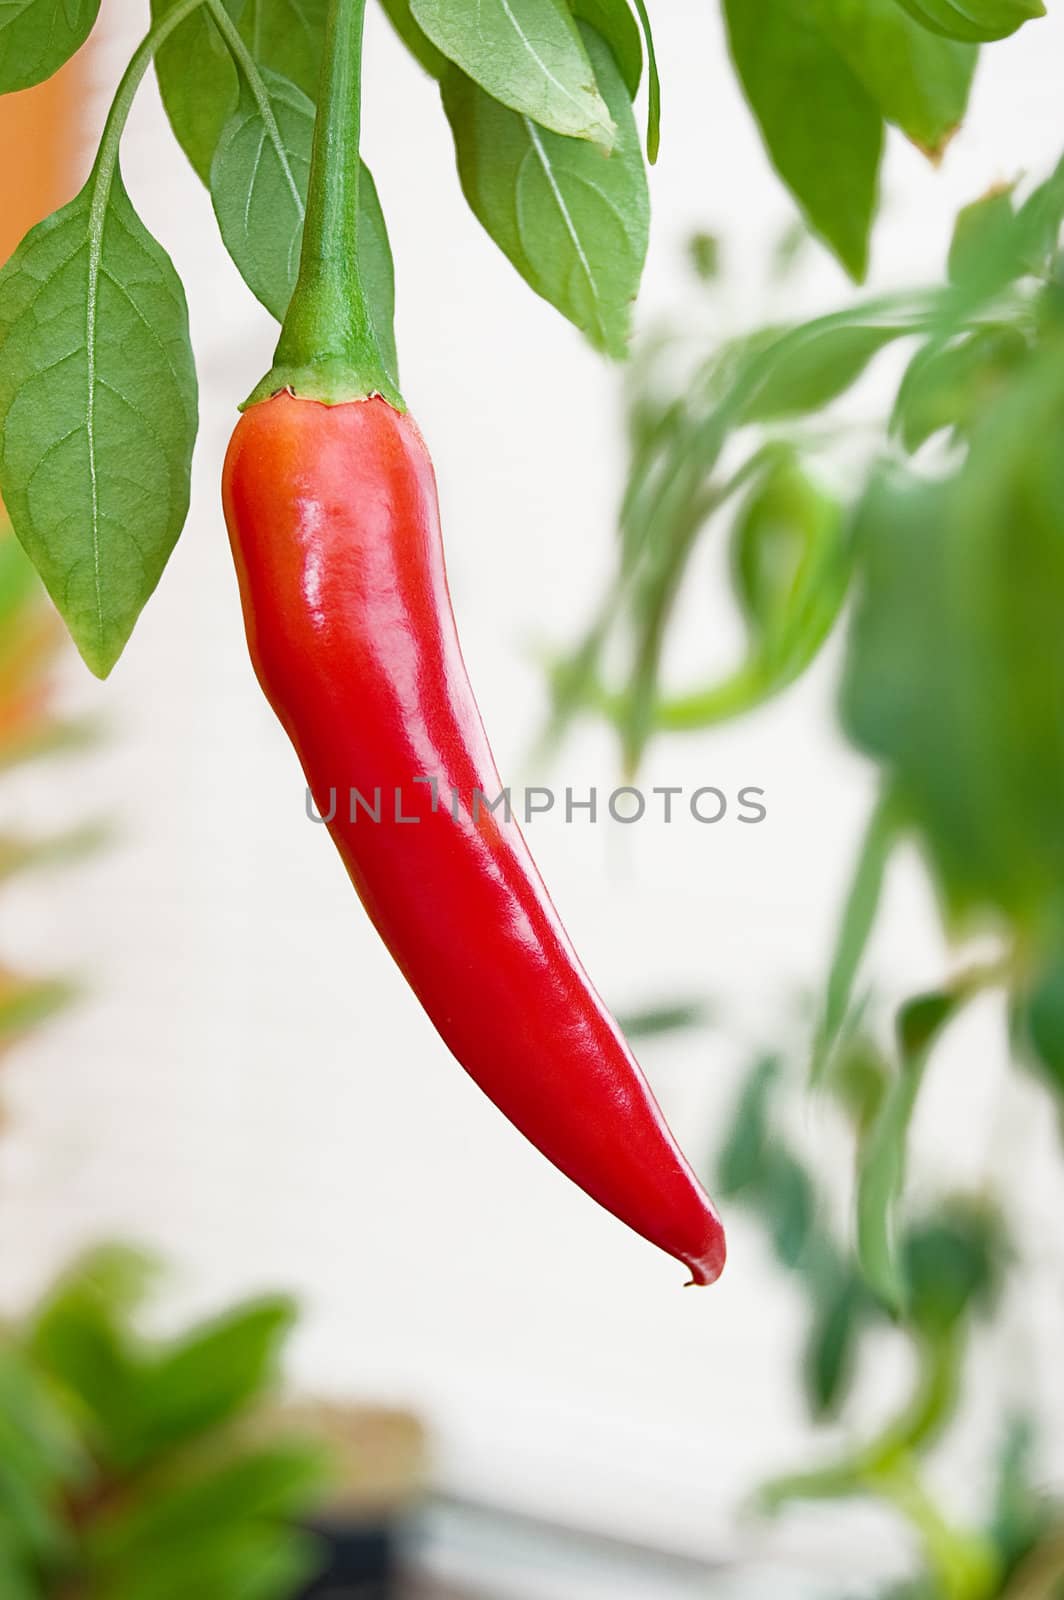 Hot chili pepper tree by Angel_a